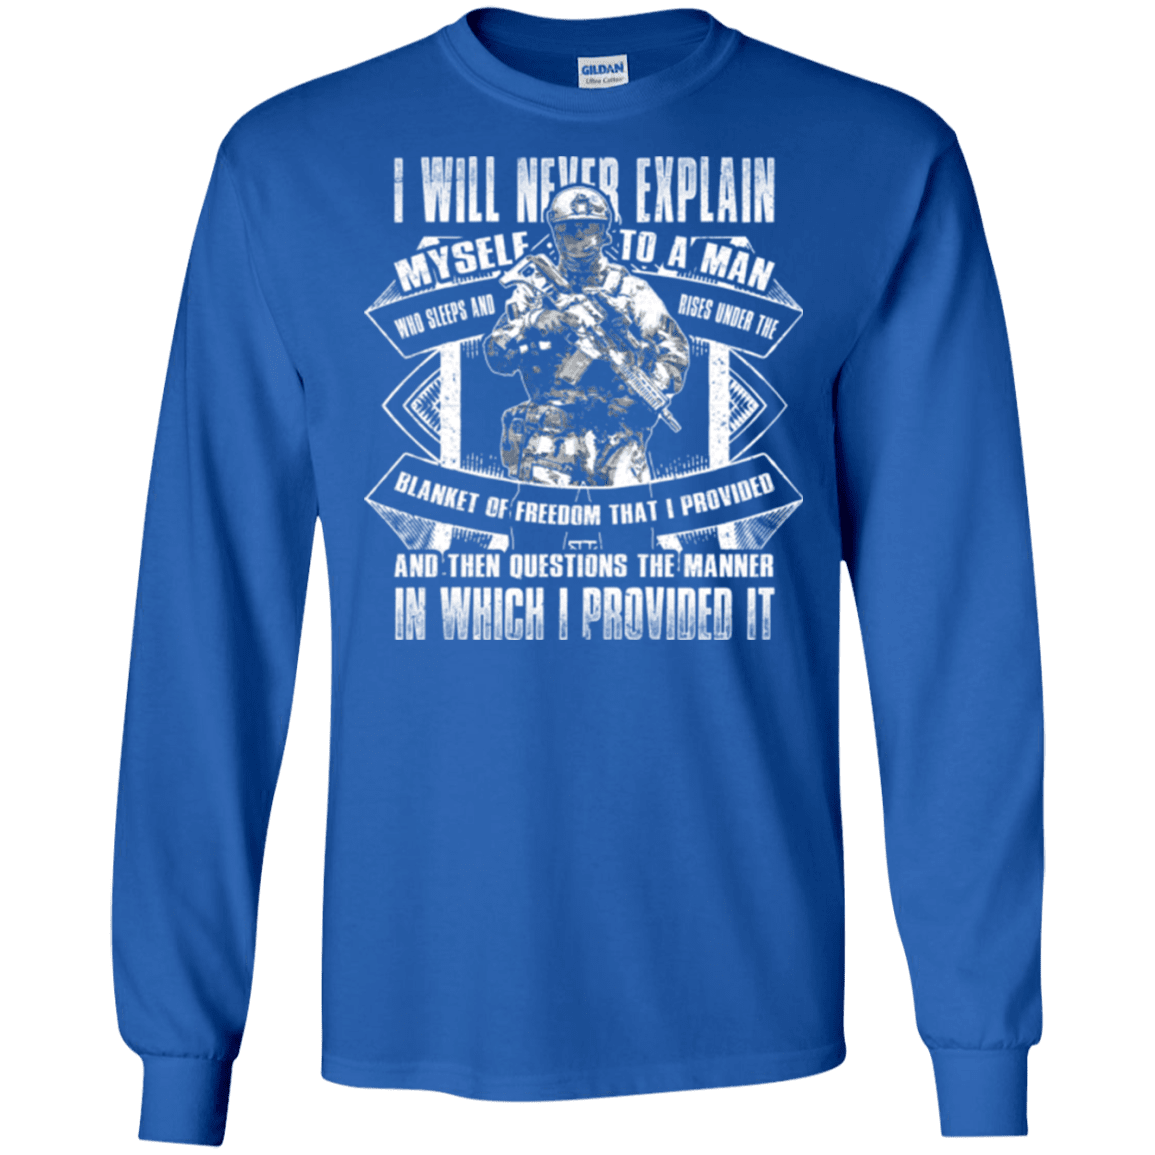 Military T-Shirt "I will never explain myself to a man" Front-TShirt-General-Veterans Nation